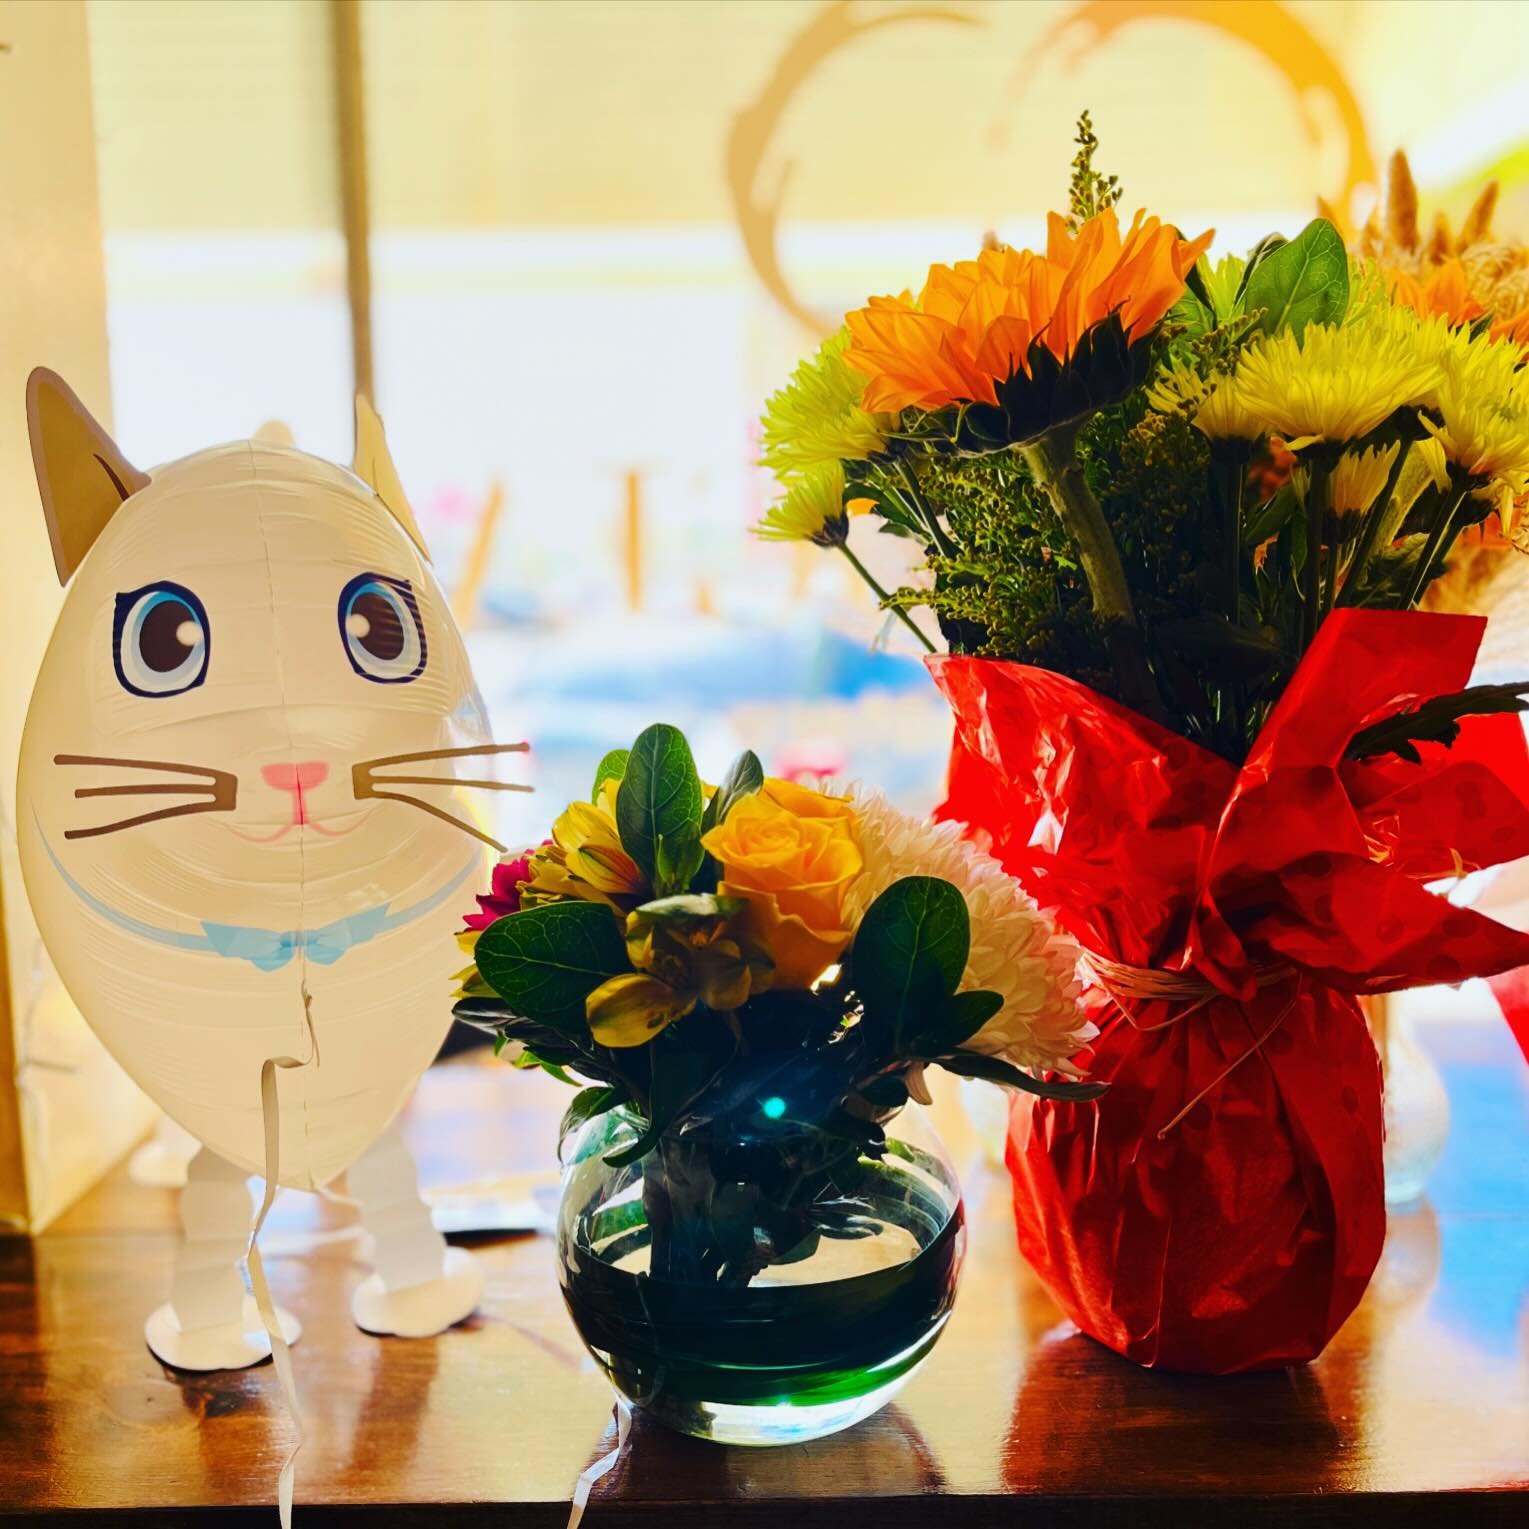 🎊 grateful beyond words 🎊

Thank you to everyone who made my birthday extra special with your messages. The flowers, bubbly wine and cat balloon (!!!) were such a delightful surprise. 

Huge shoutout to my Wednesday regulars for the champagne and g